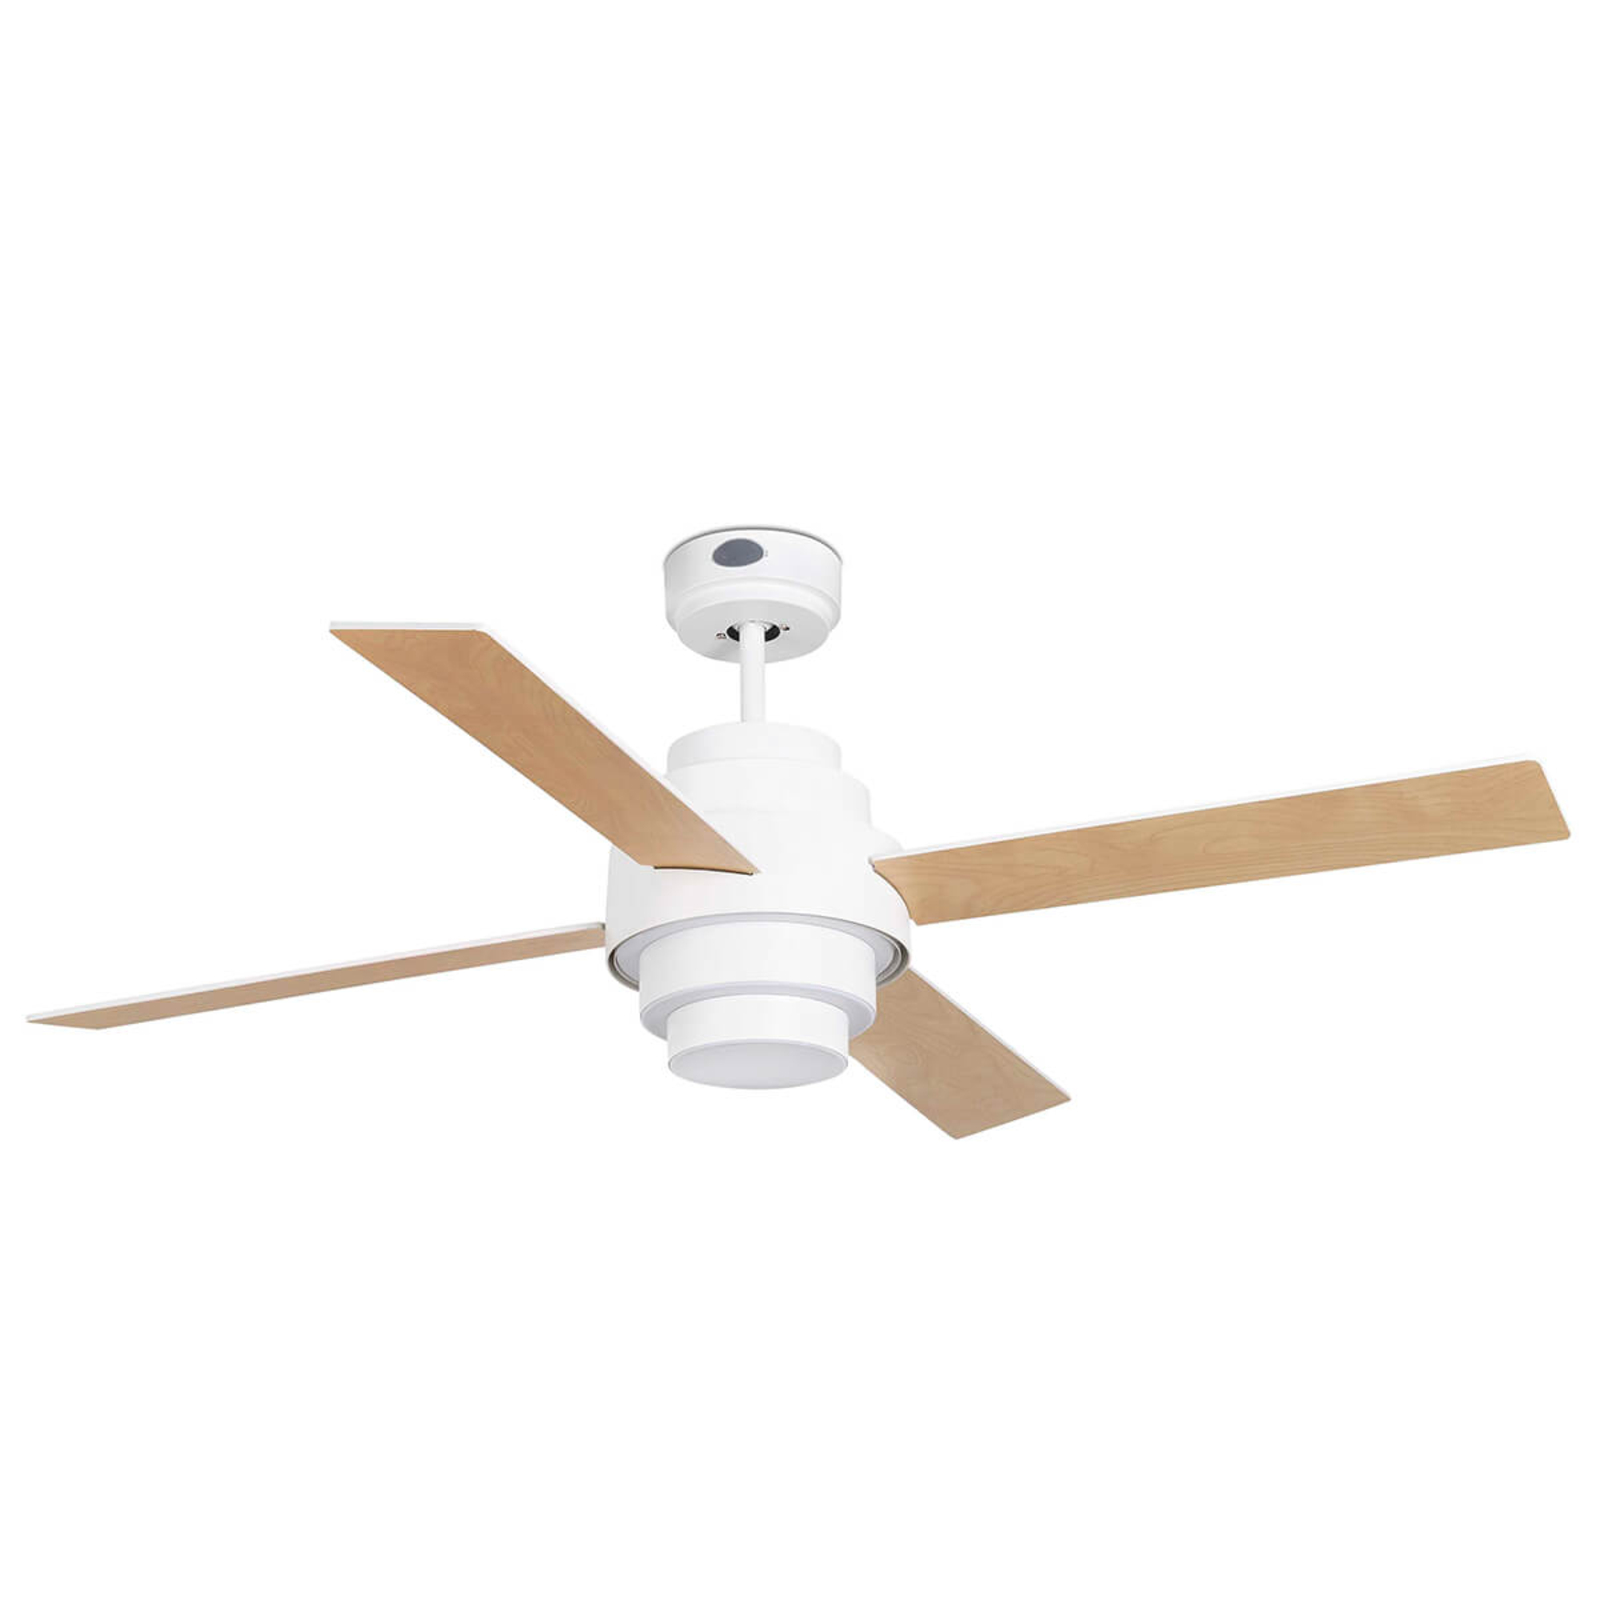 Efficient Disc ceiling fan with LED